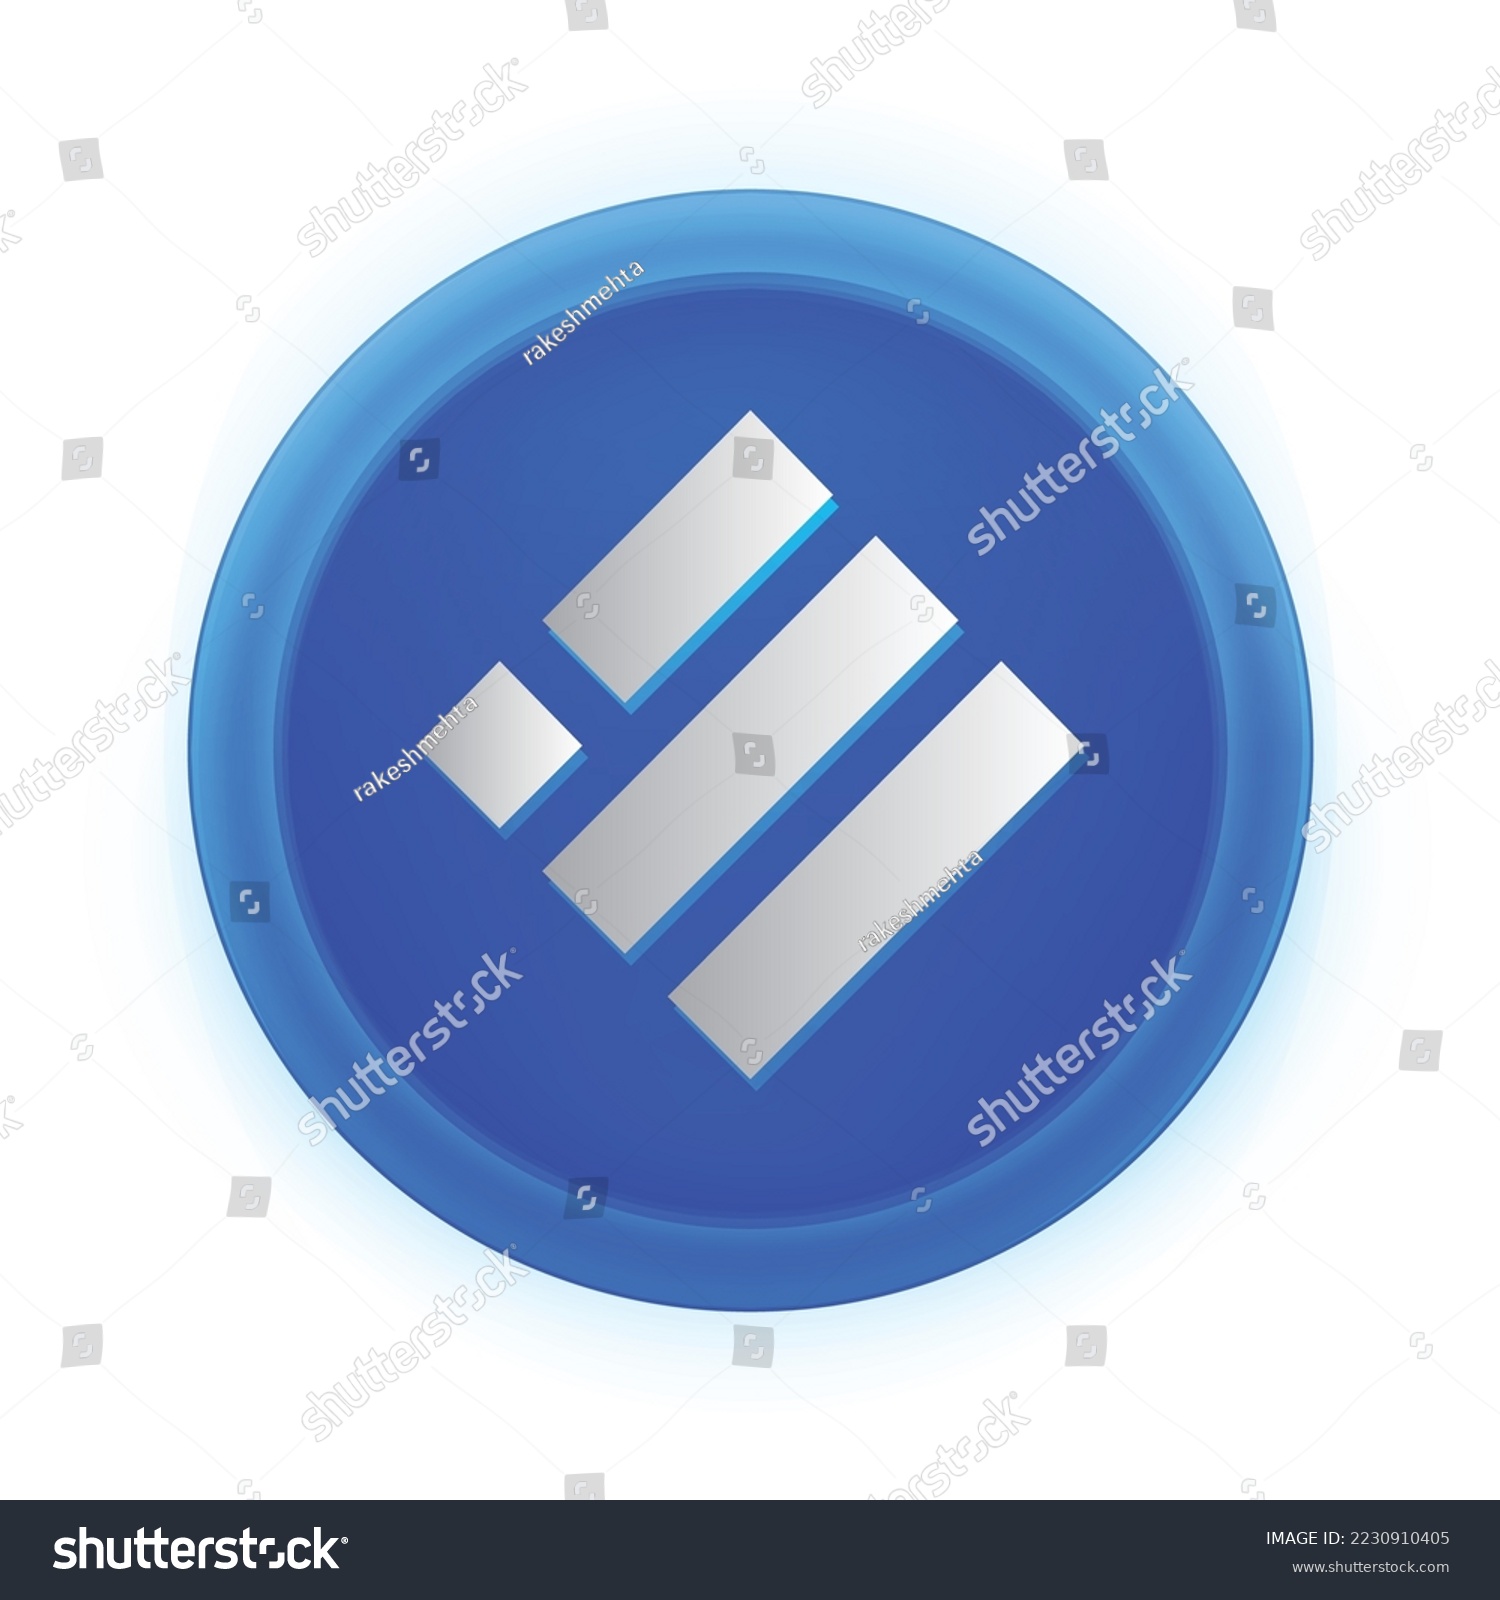 SVG of Binance USD (BUSD) crypto logo isolated on white background. BUSD Cryptocurrency coin token vector svg